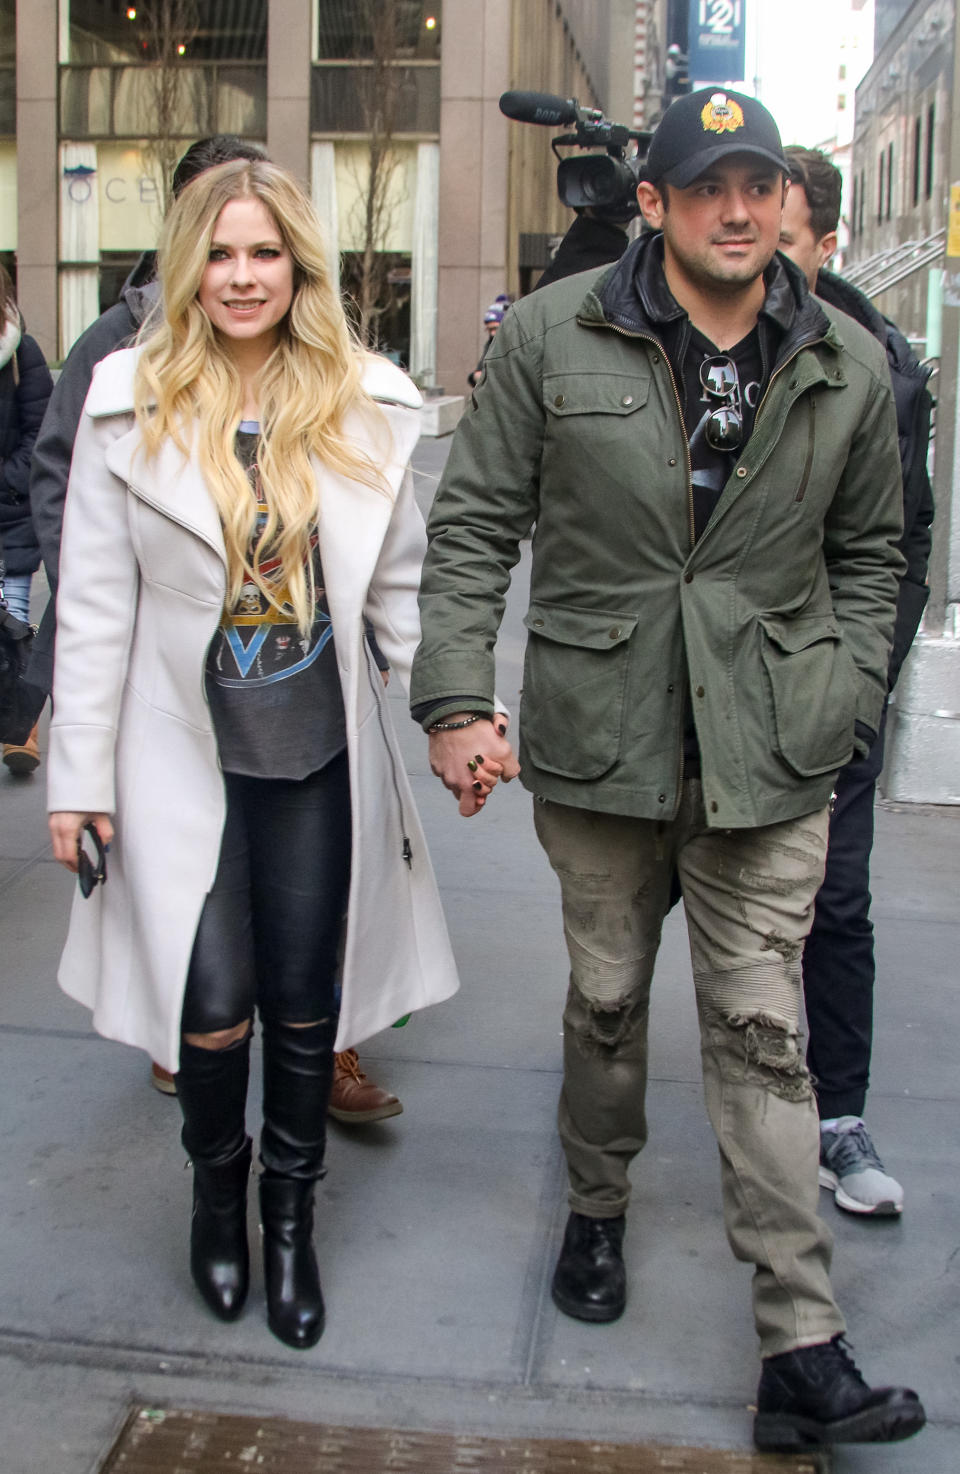 Two individuals walking hand in hand, one in a white coat and boots, the other in a green jacket and cap